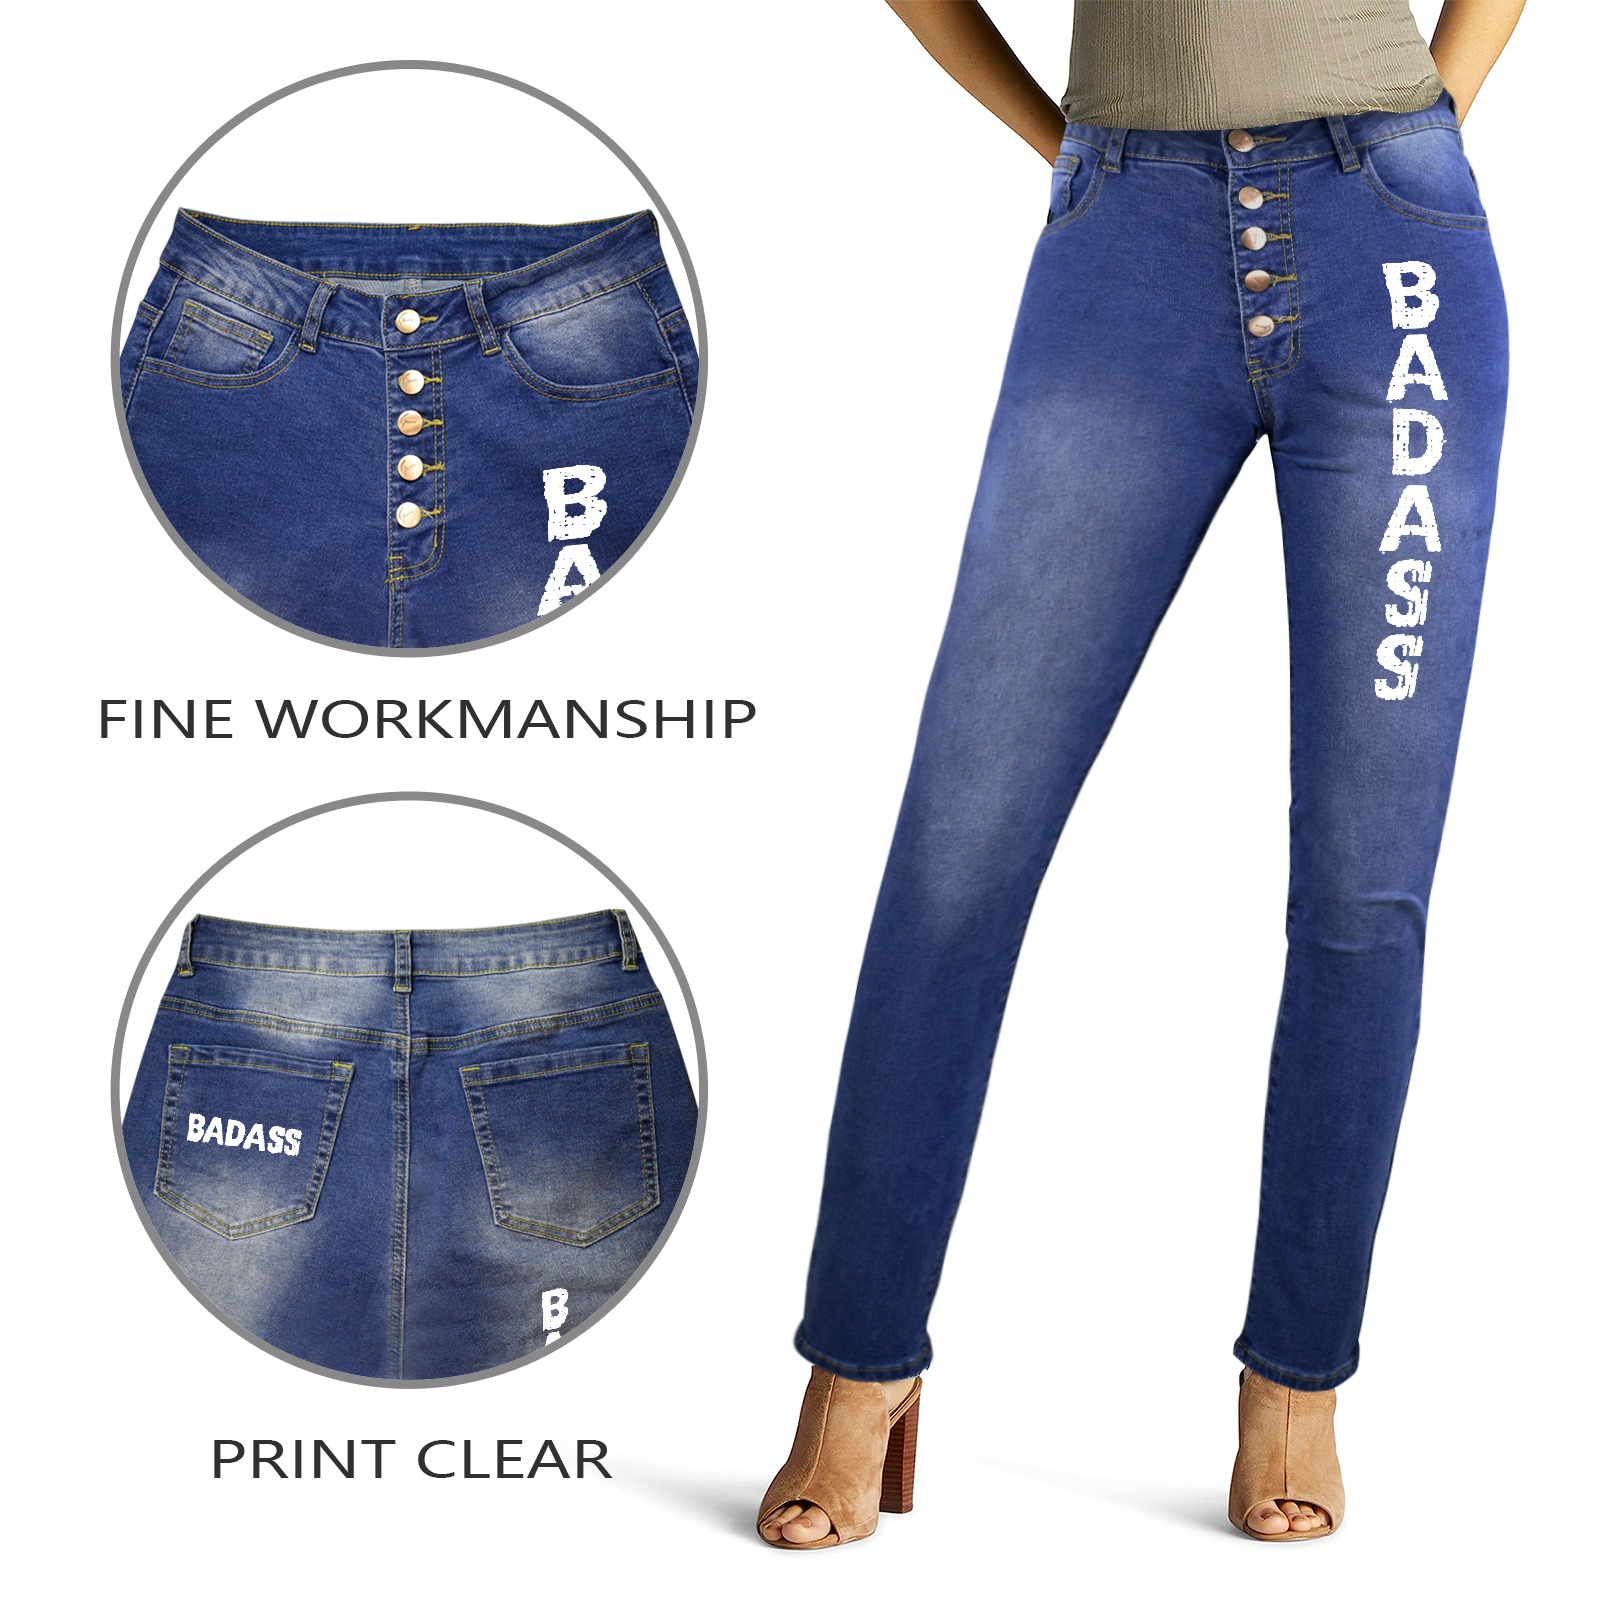 Badass funny decorative white text. Horizontal. Women's Jeans (Front&Back Printing)